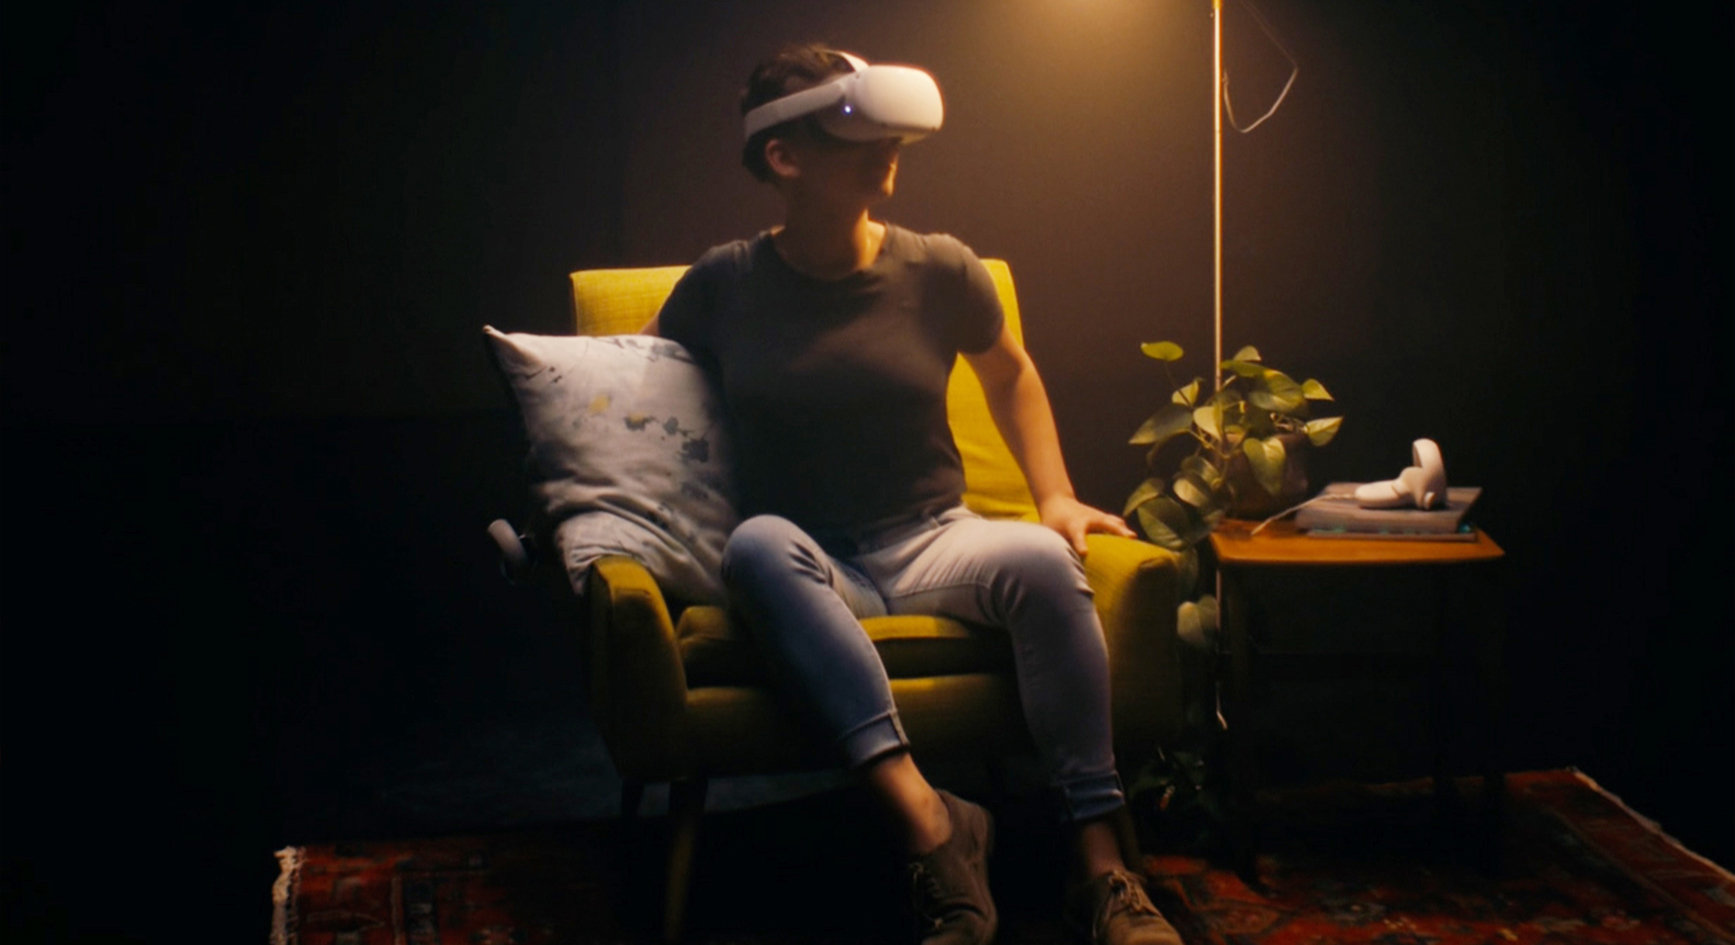 rendering of person wearing a VR headset